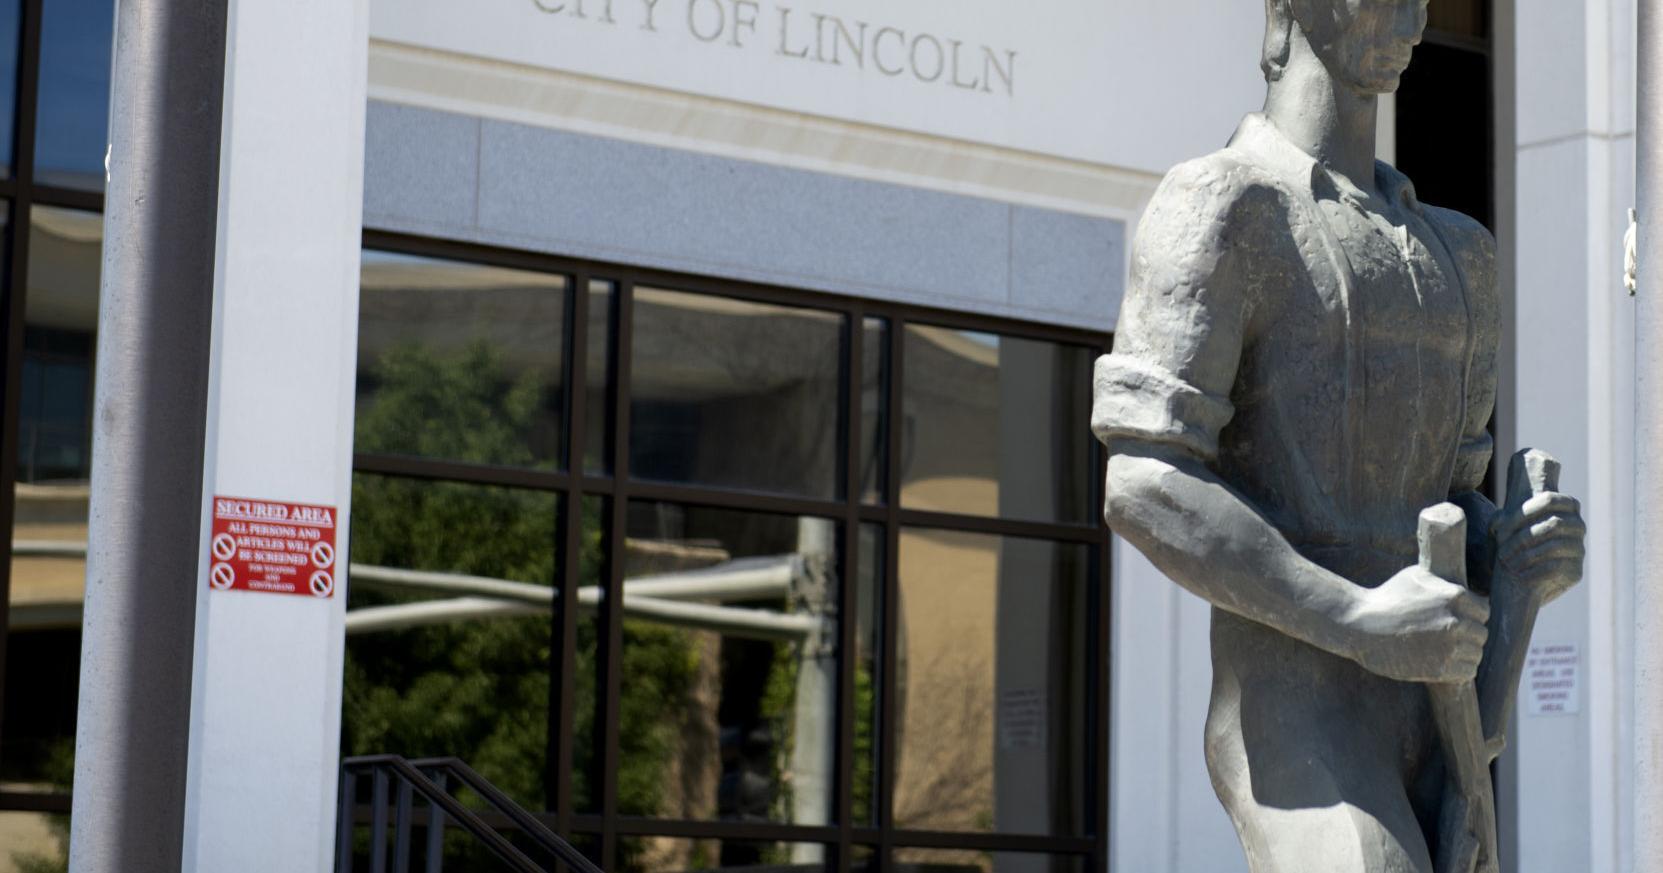 Lincoln City Council proposed budget changes would take $1.4 million more from cash reserves